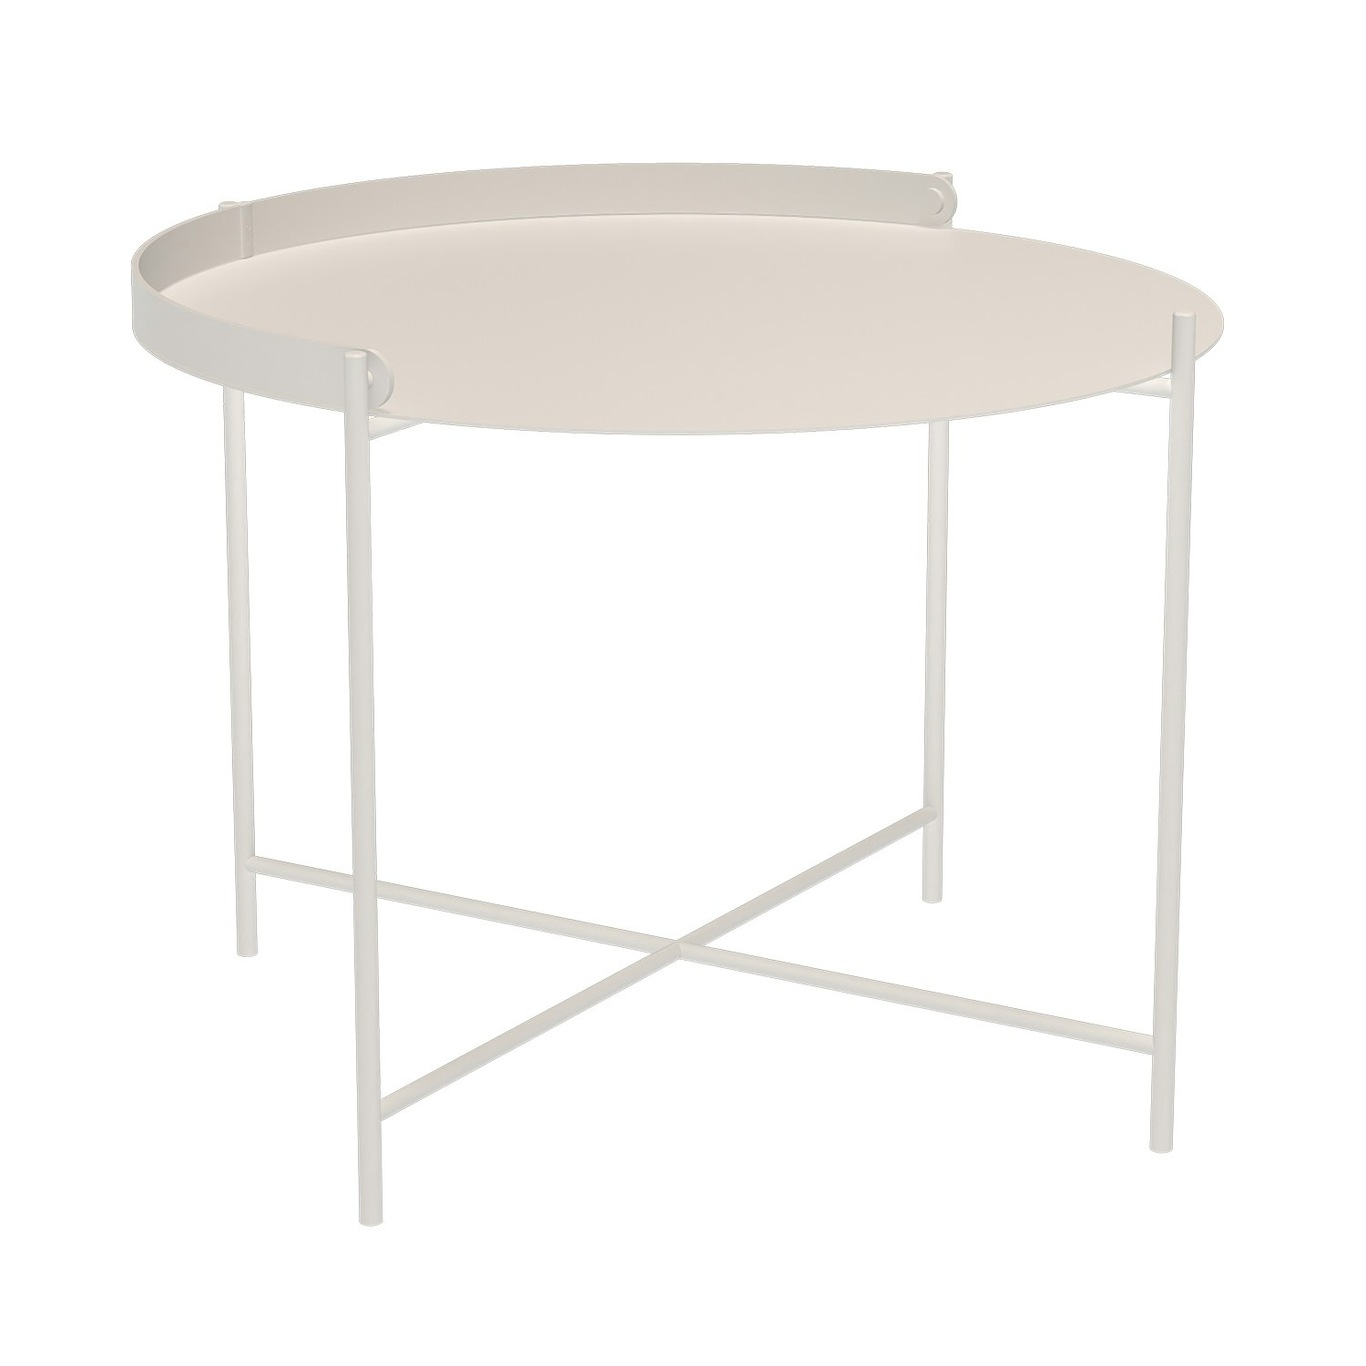 Edge Tray Table Ø62 cm, Muted White